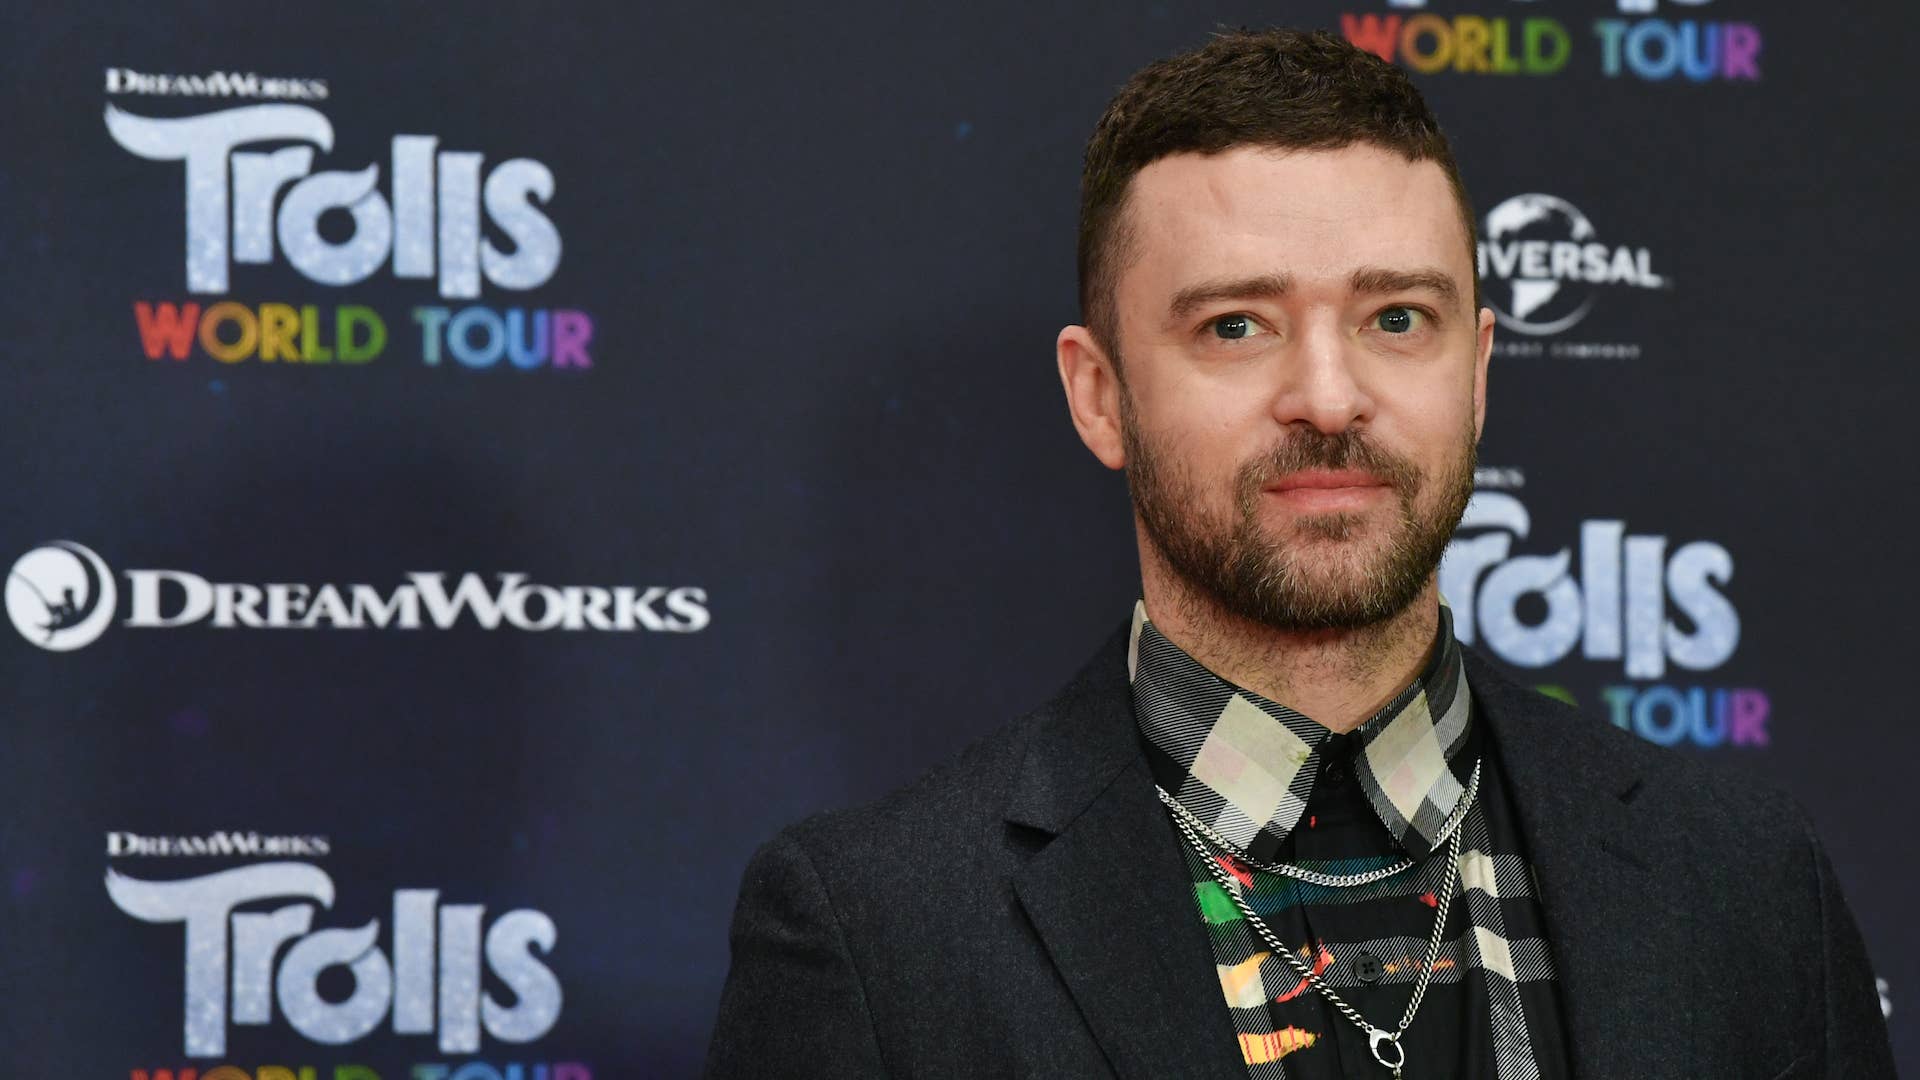 Justin Timberlake, actor and musician, is at the photo shoot for the movie "Trolls World Tour"